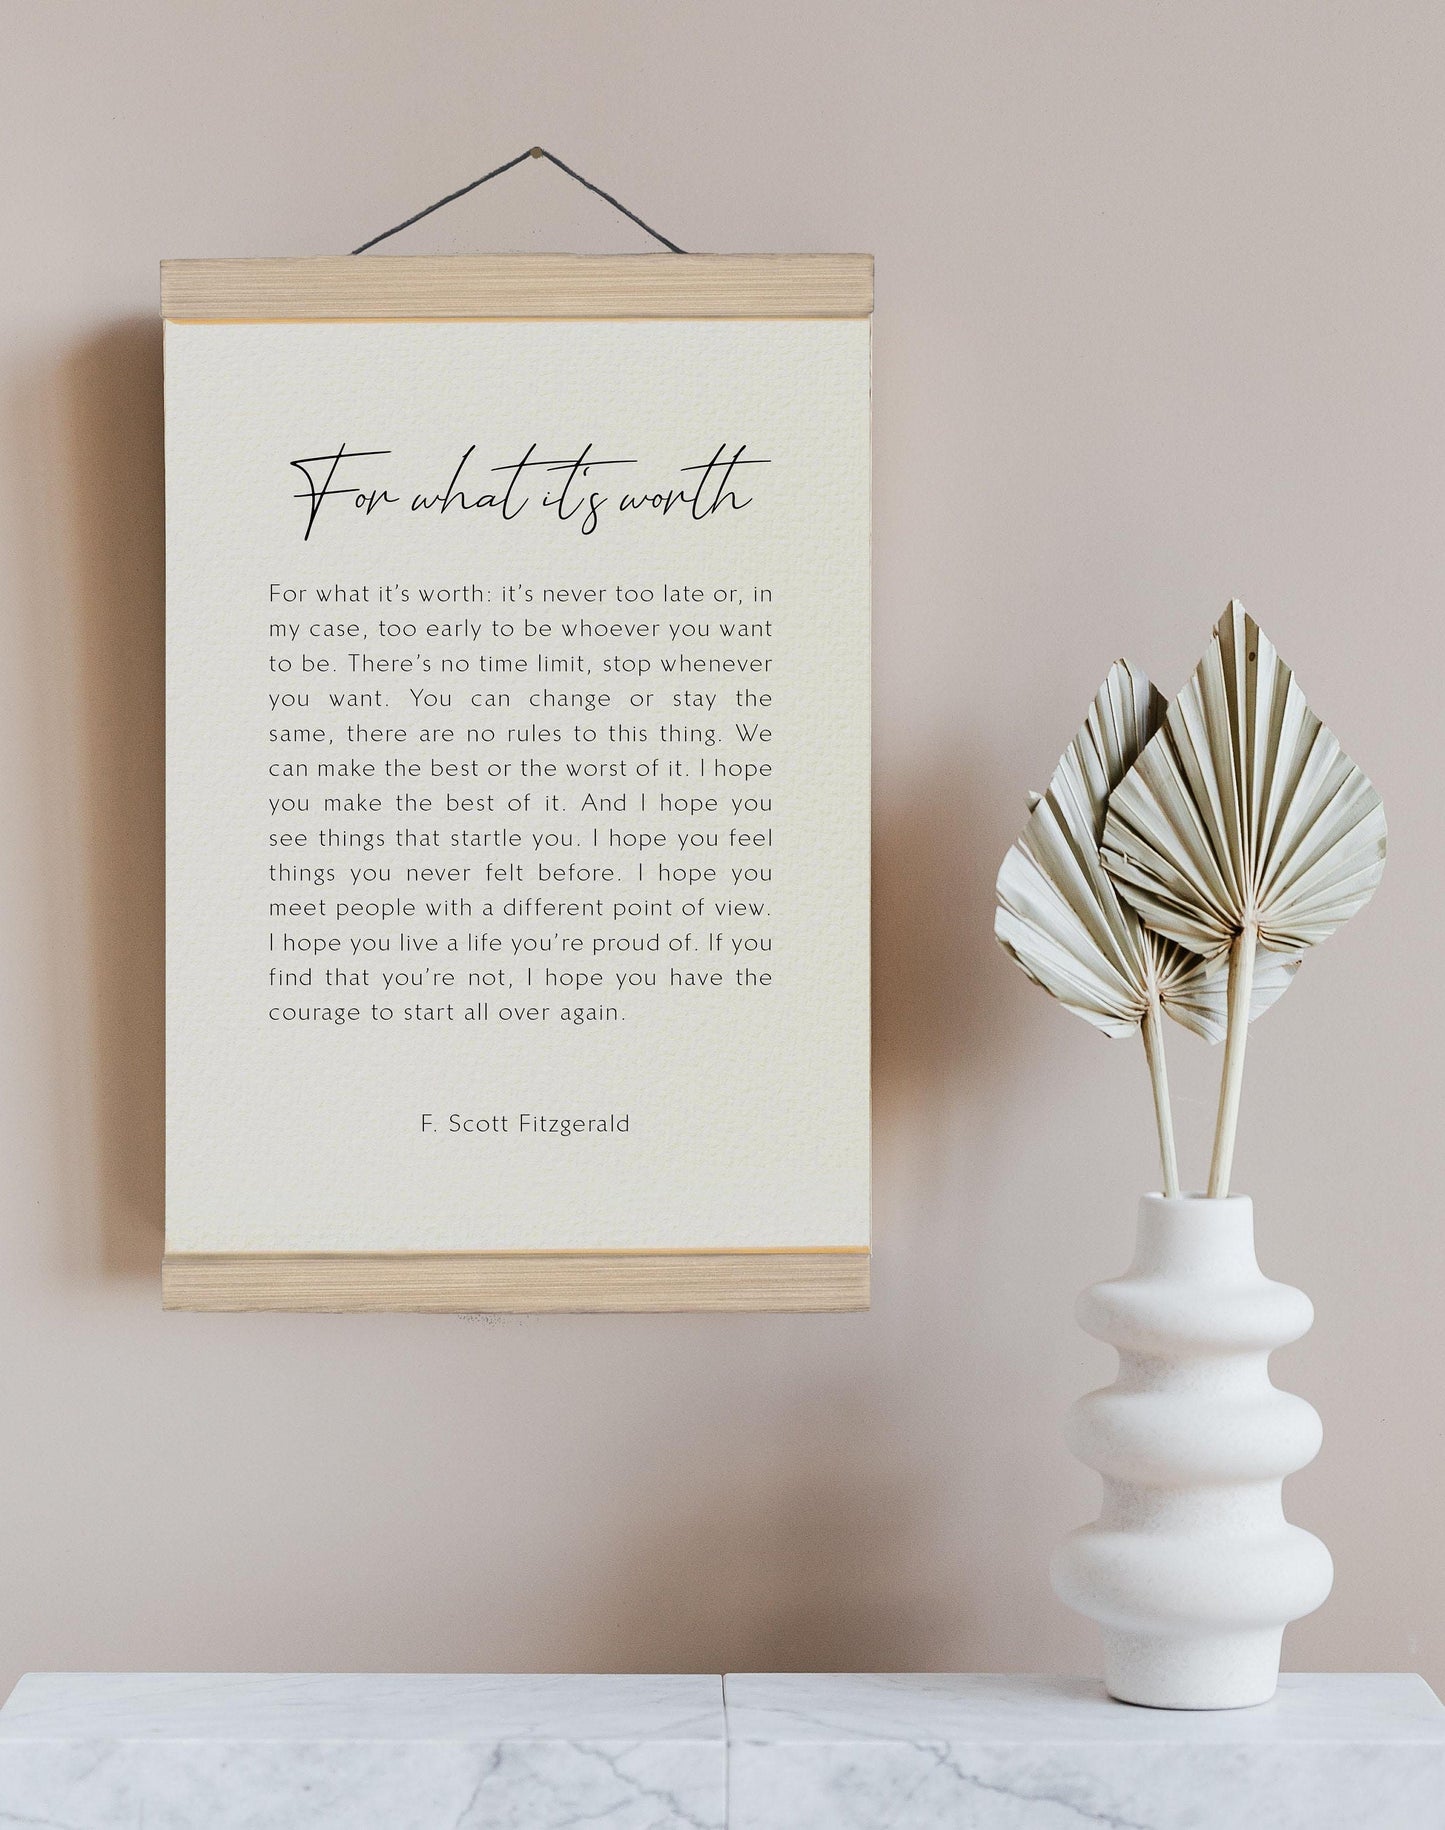 For what it's worth Print Framed poem, F. Scott Fitzgerald Poem, Framed Calligraphy & Typography For what it's worth quote, Benjamin Button